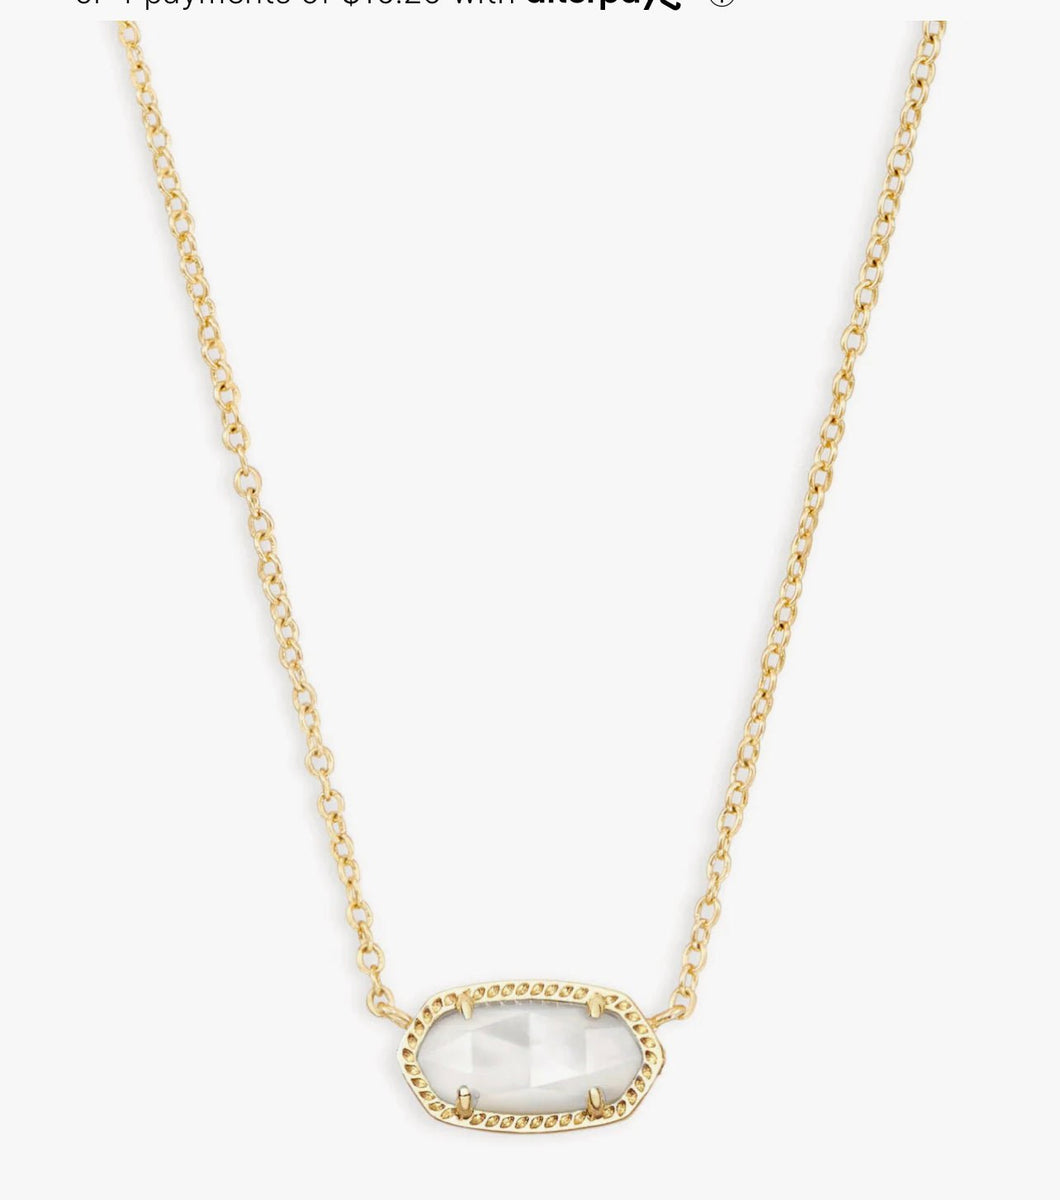 Kendra Scott-Elisa Gold Pendant Necklace in Ivory Mother-of-Pearl 9608862606